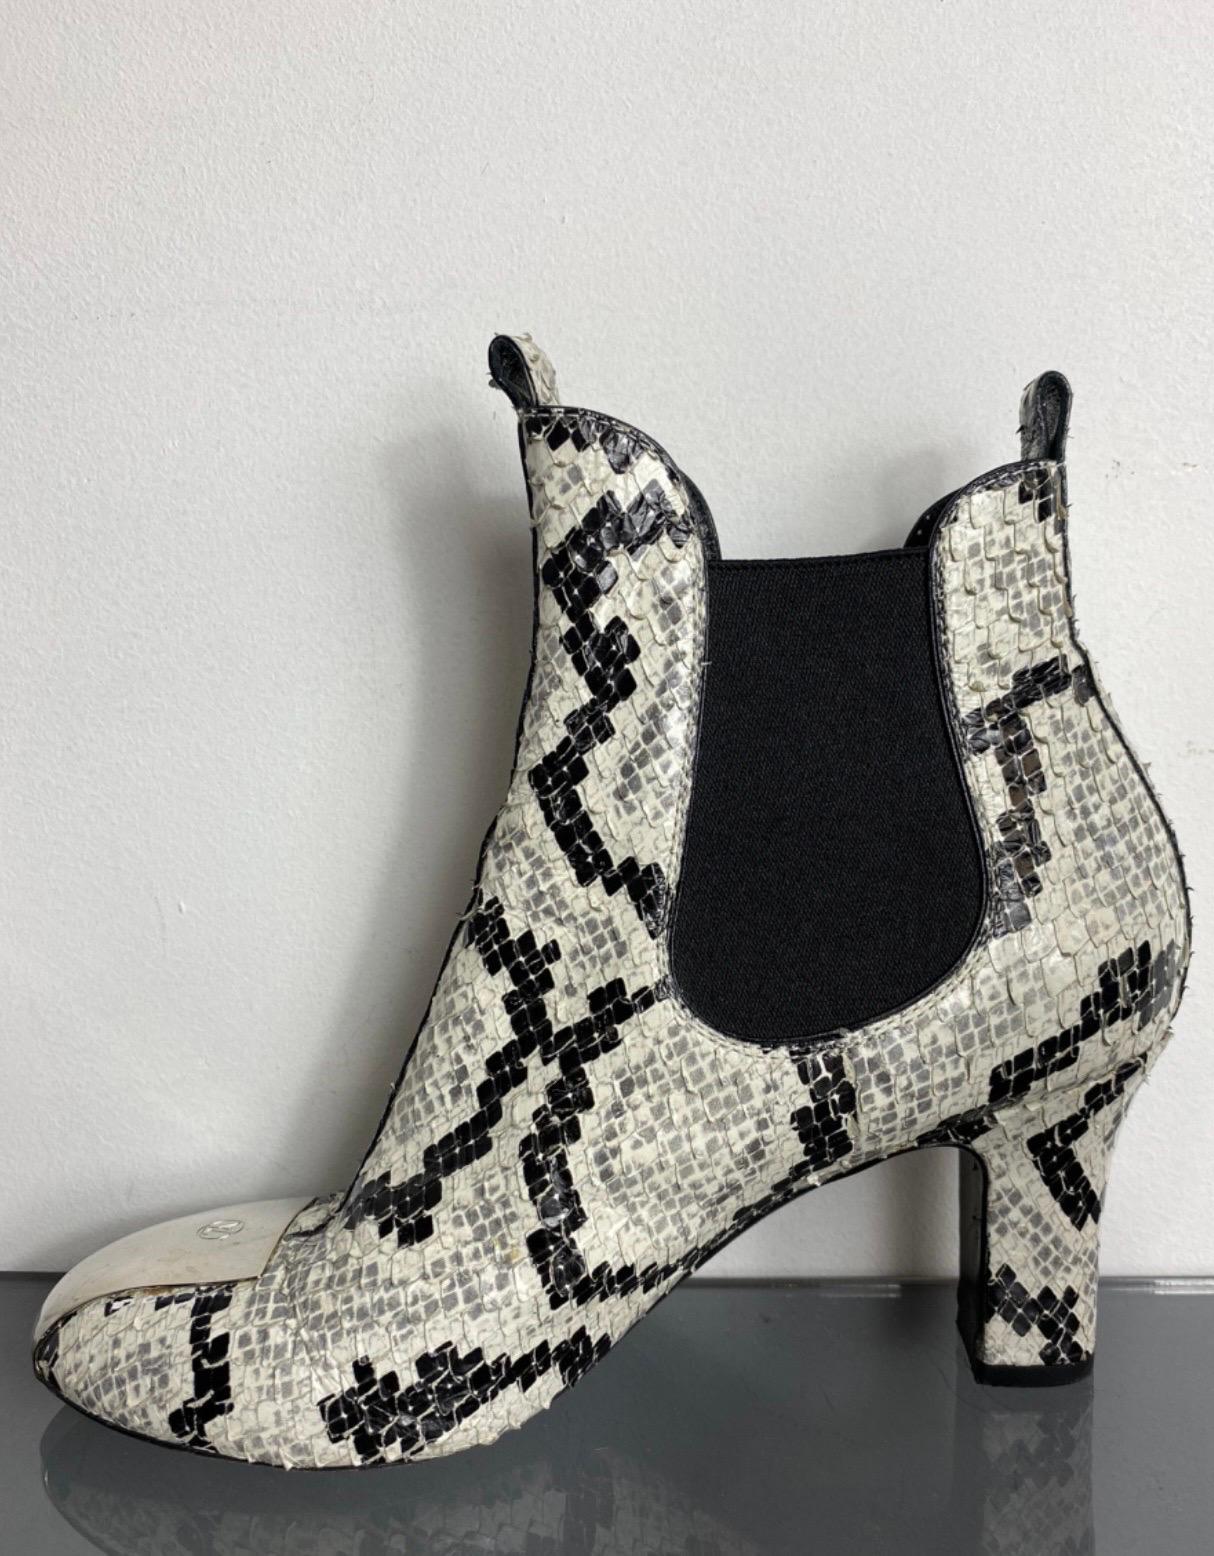 Louis Vuitton ankle boot, in black and white reptile with the toes part covered in steel and LV branded, use signs as you can see in pics.
size 39, insole approx. 27cm, heel 8cm, all the rest in good condition.